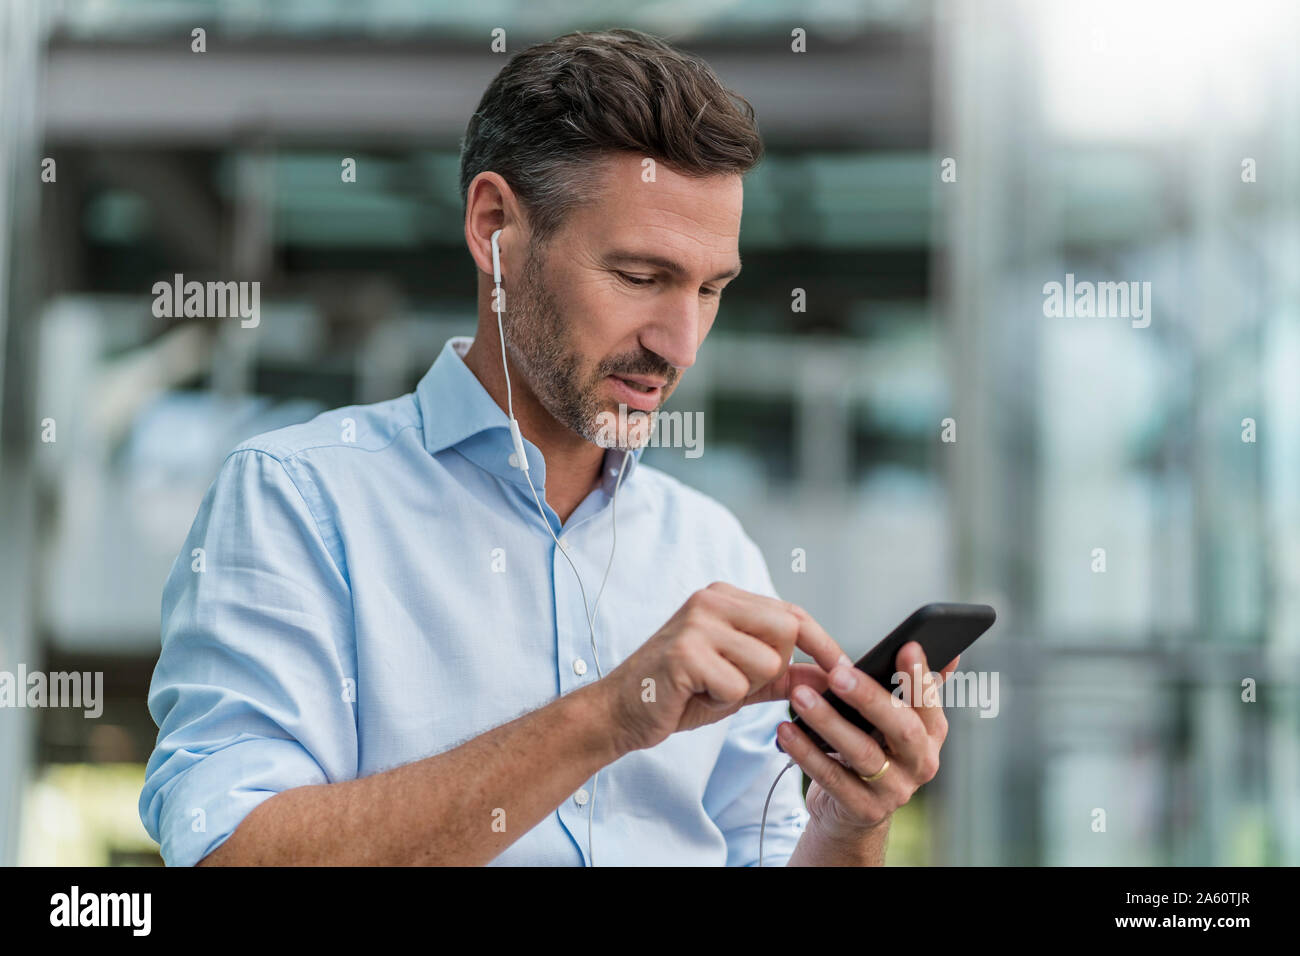 Businessman with earphones and cell phone in the city Stock Photo